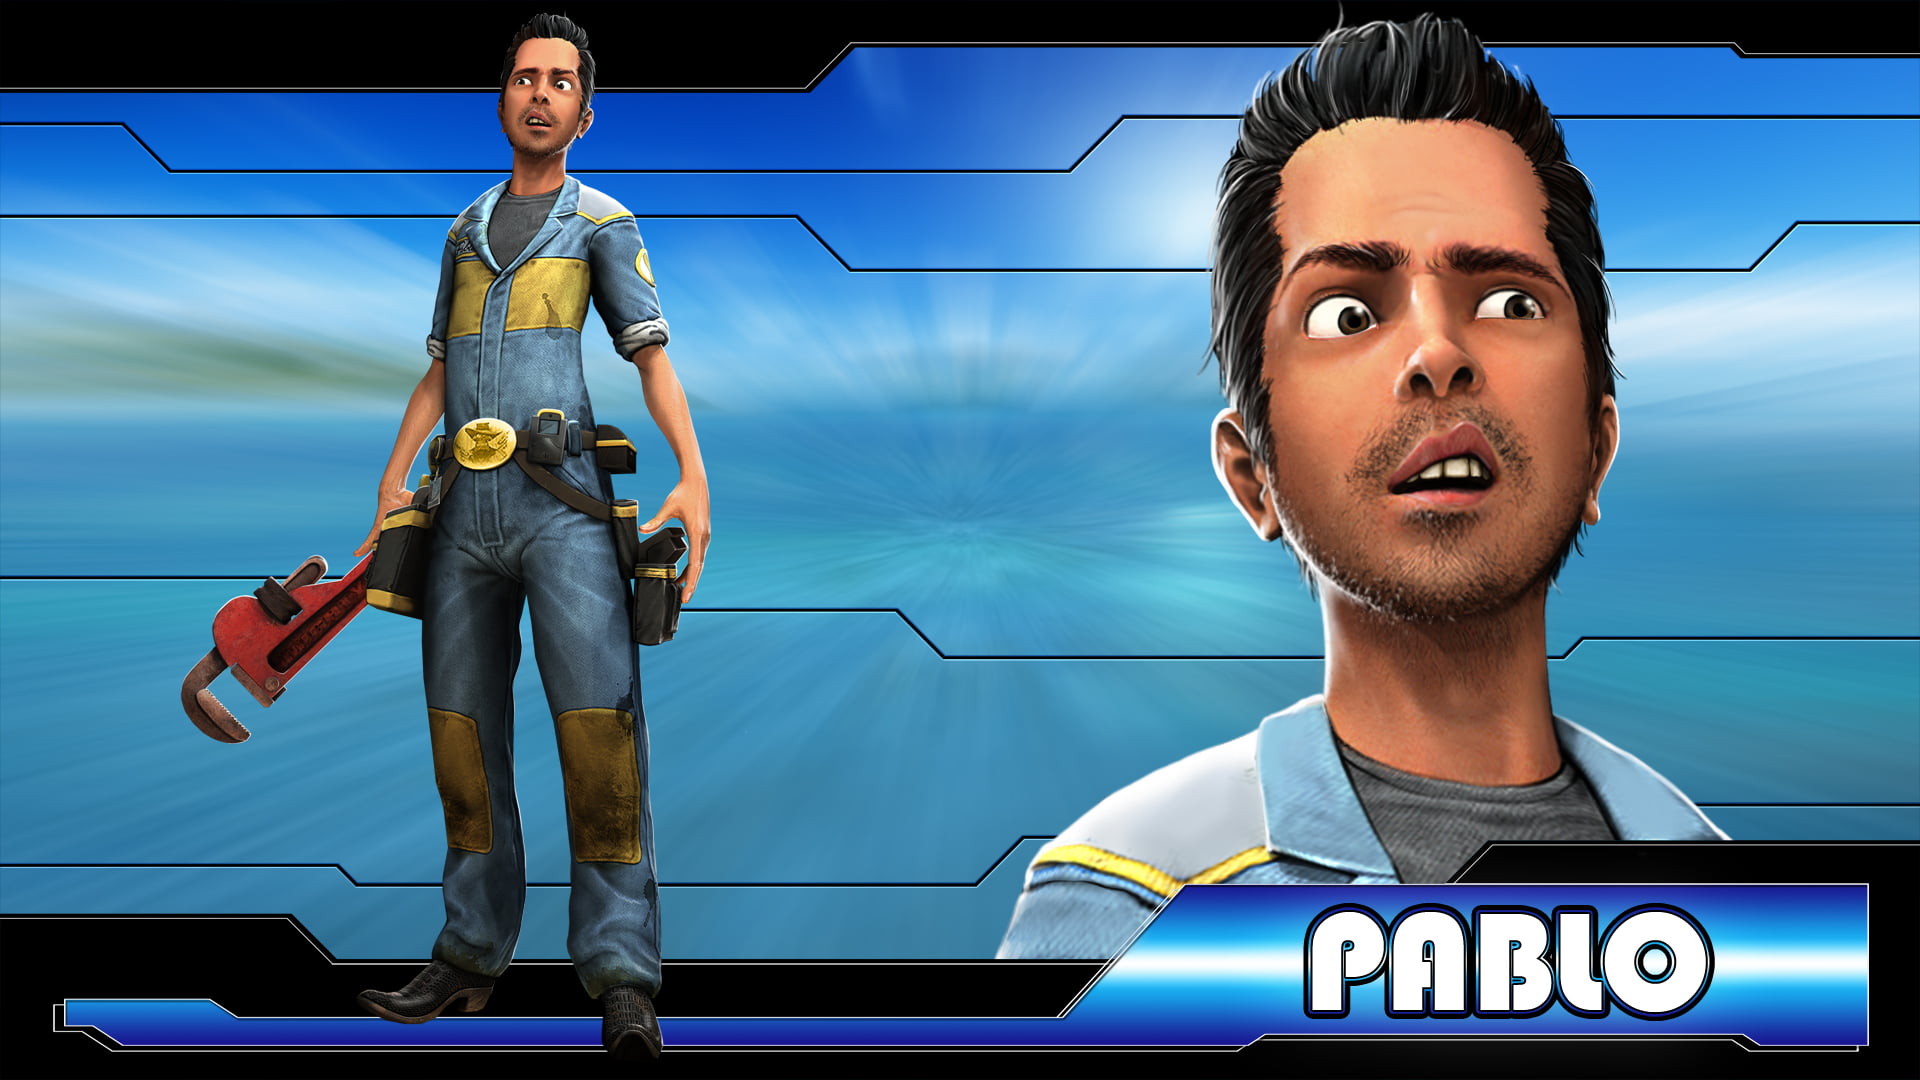 Pablo Fortnite skin, LocoCycle, Pablo, Twisted Pixel, video games